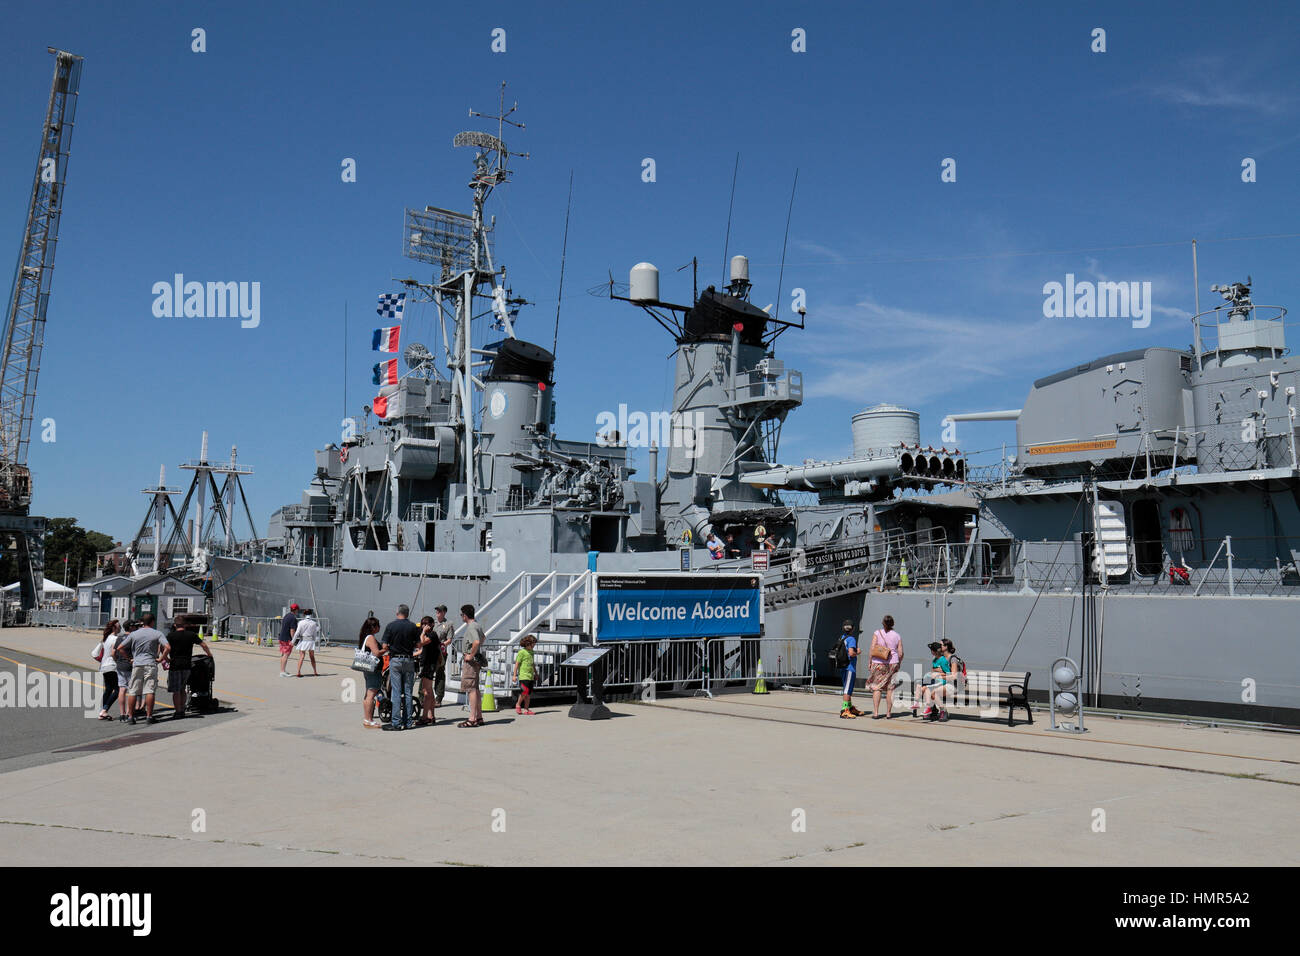 Le destroyer USS Cassin Young au Boston National Historical Park, Charlestown Navy Yard, Boston, Massachusetts, United States. Banque D'Images